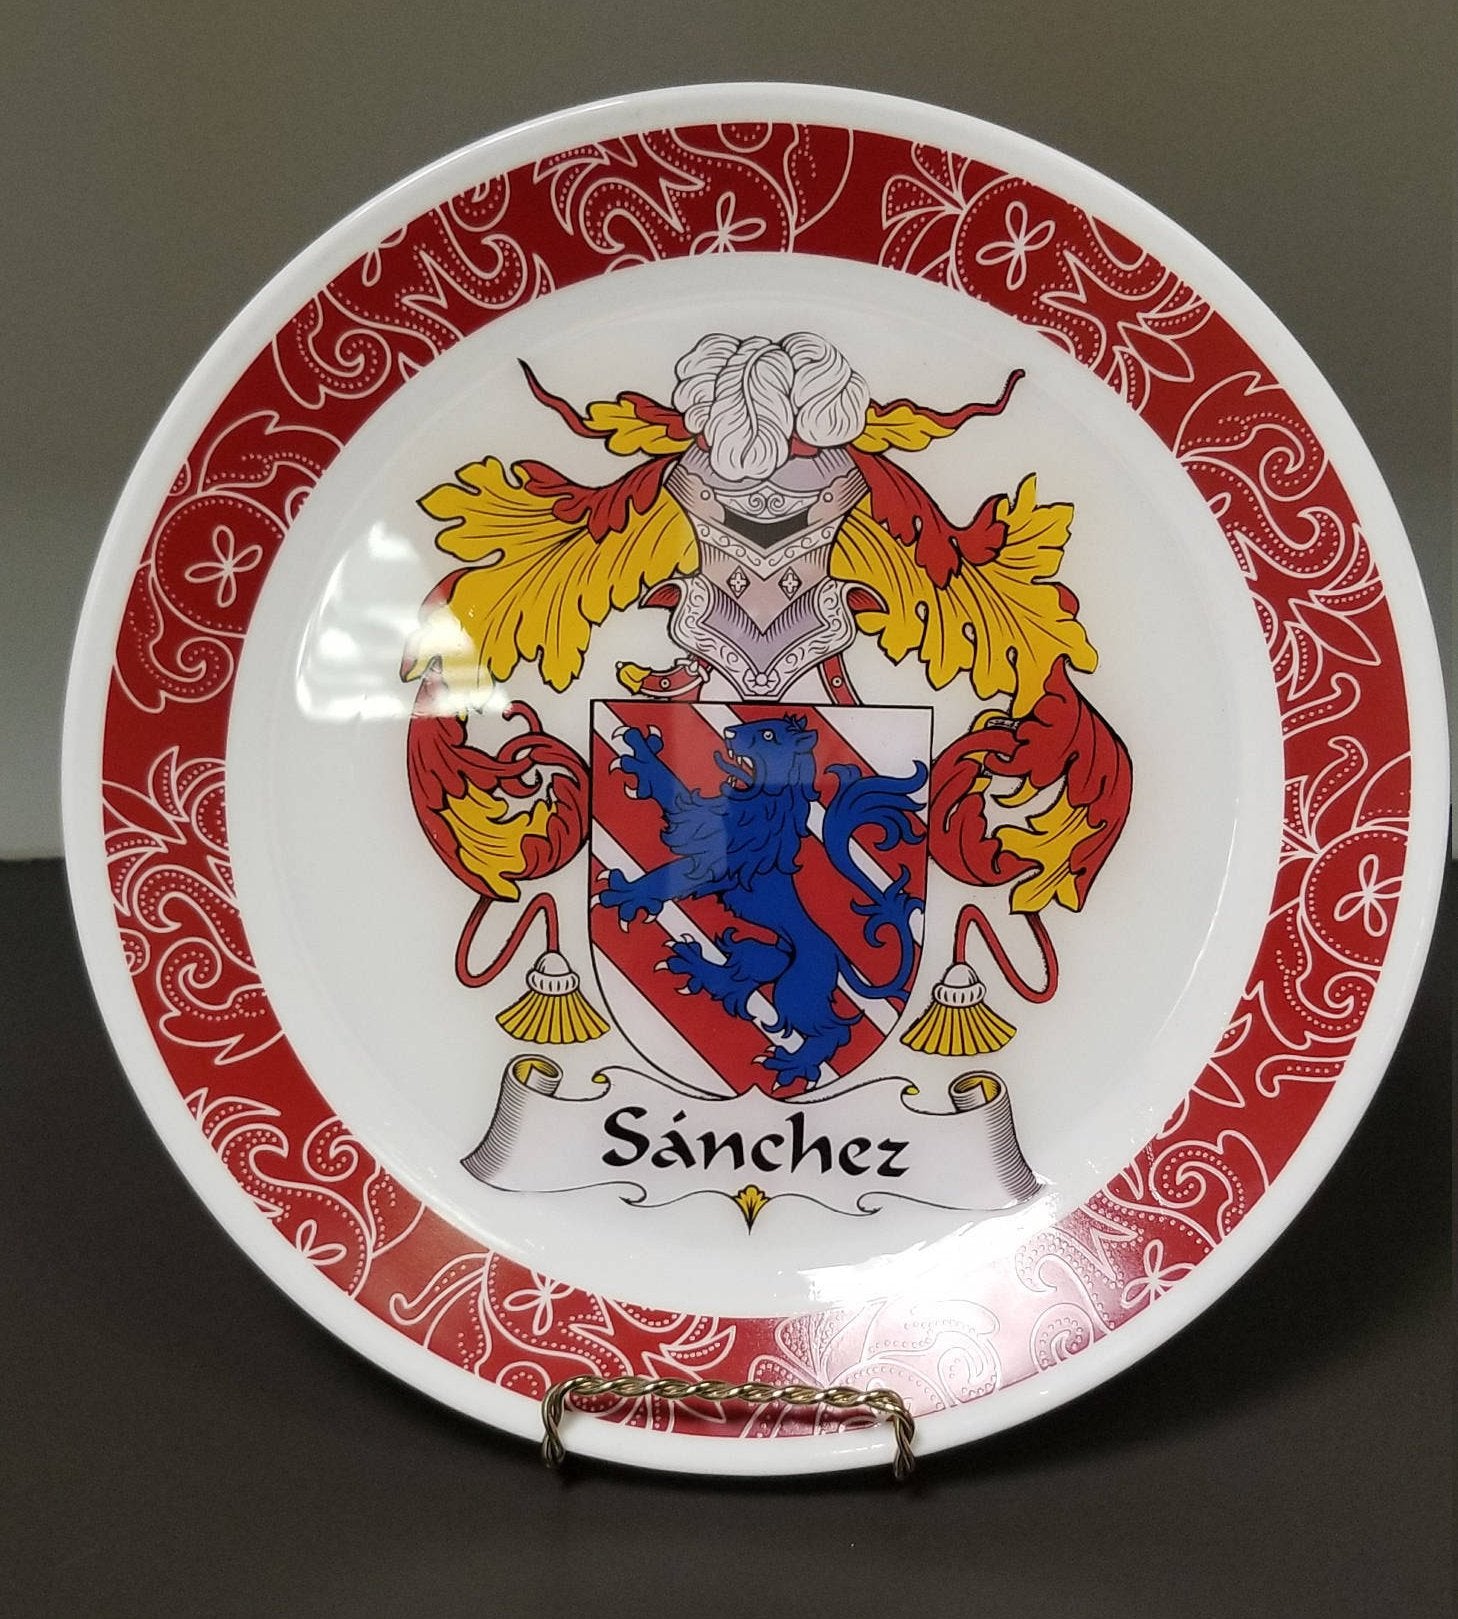 Coat of Arms, Custom Wall Art, Plague, Personalized Gift, Decorative Plate, Family Heirloom, Crest - CCCreationz